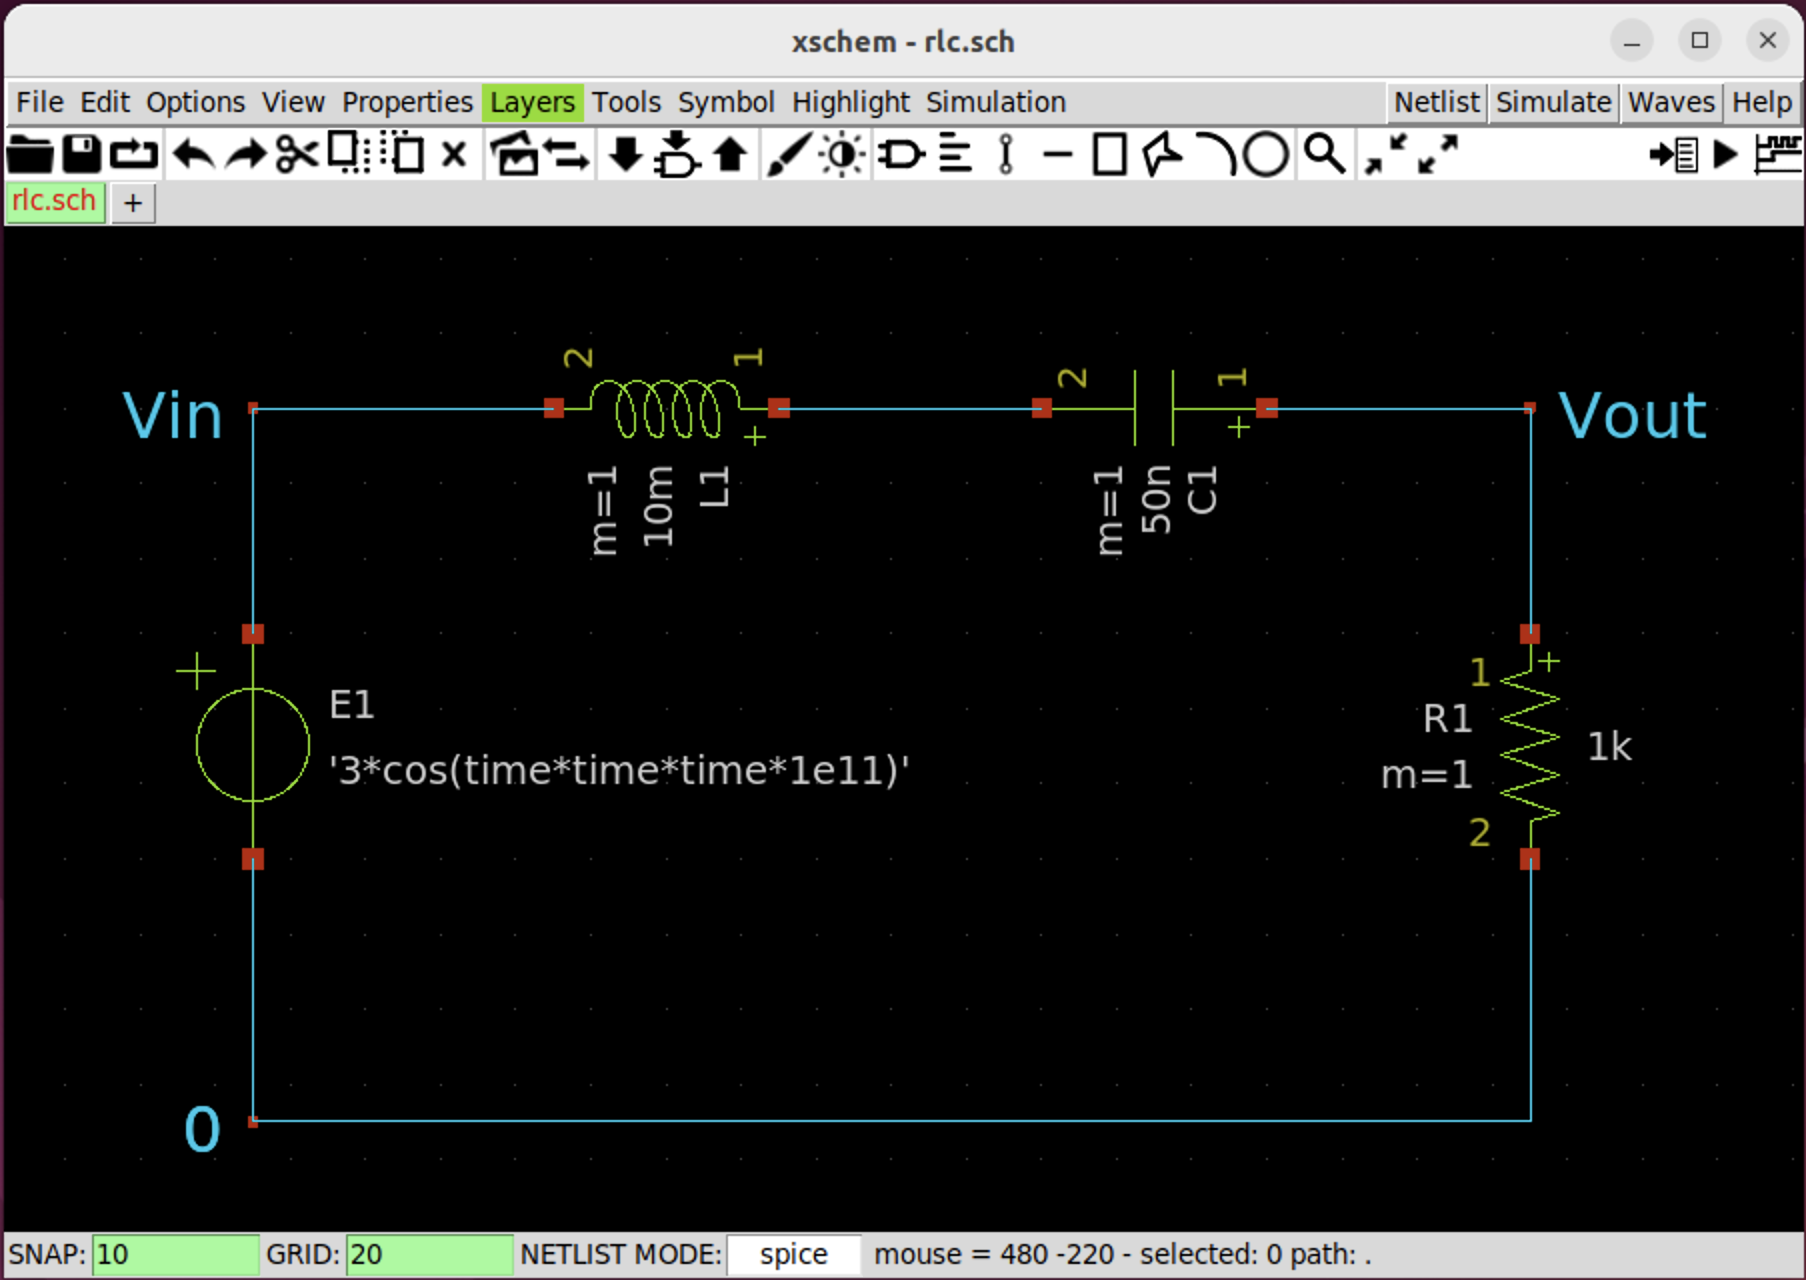 Add Vin and Vout label for the net into the schematic